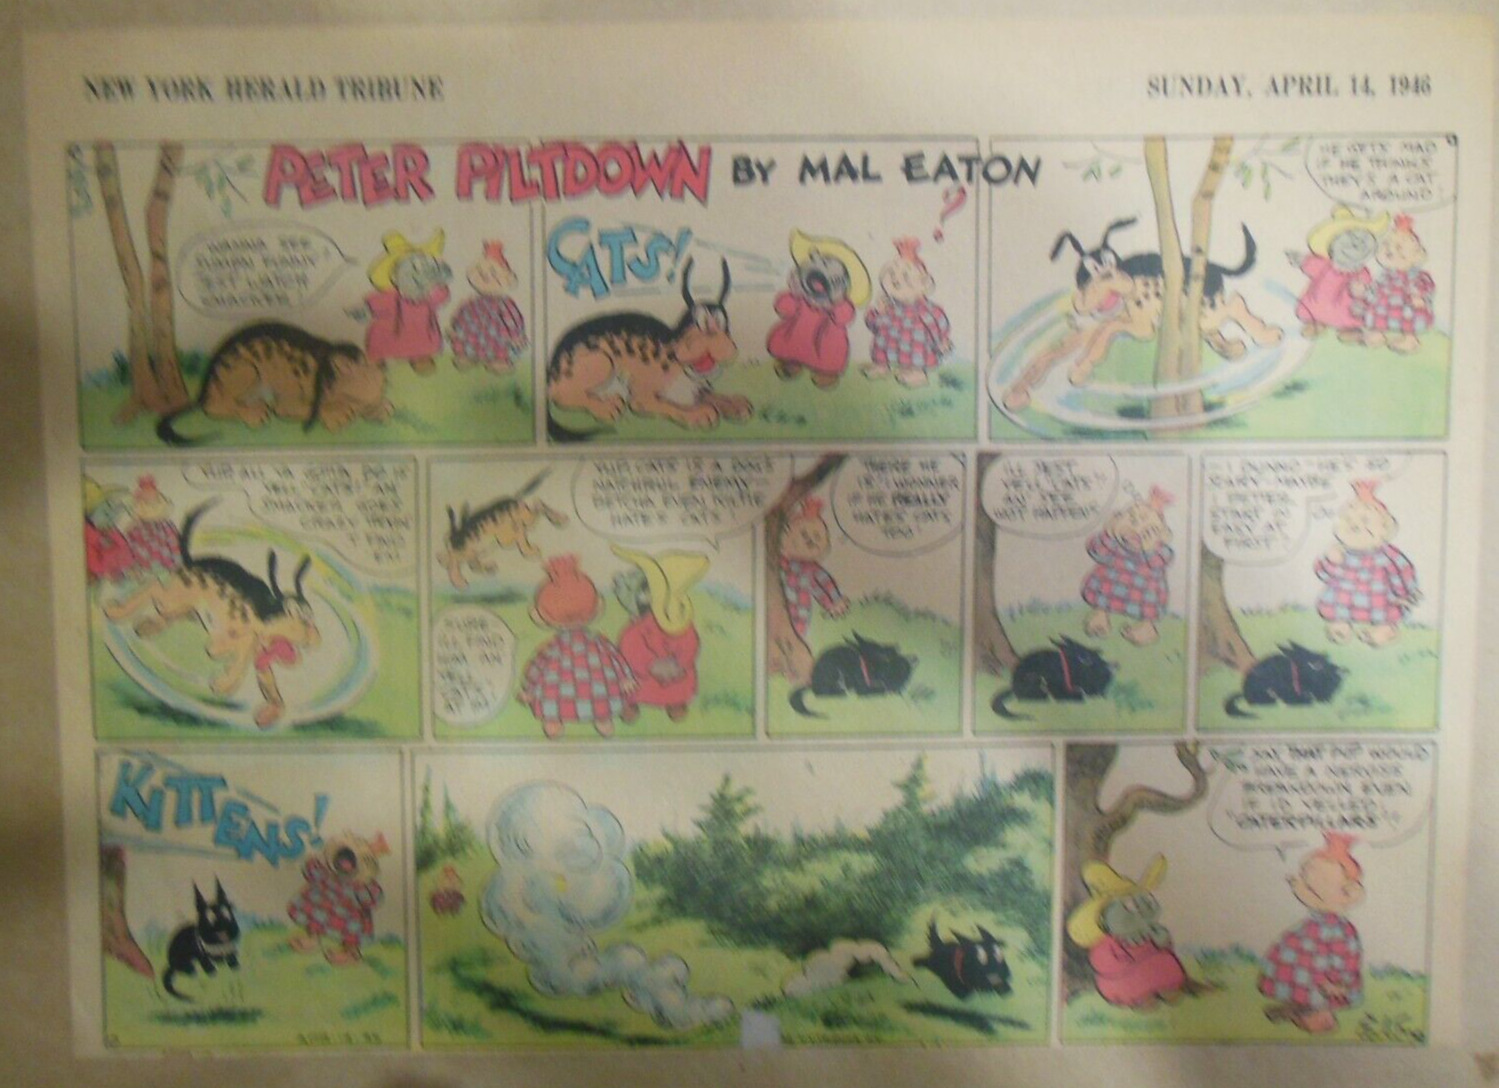 Peter Piltdown Sunday Page by Mal Eaton from 4/14/1946 Size: 11 x 15 inches